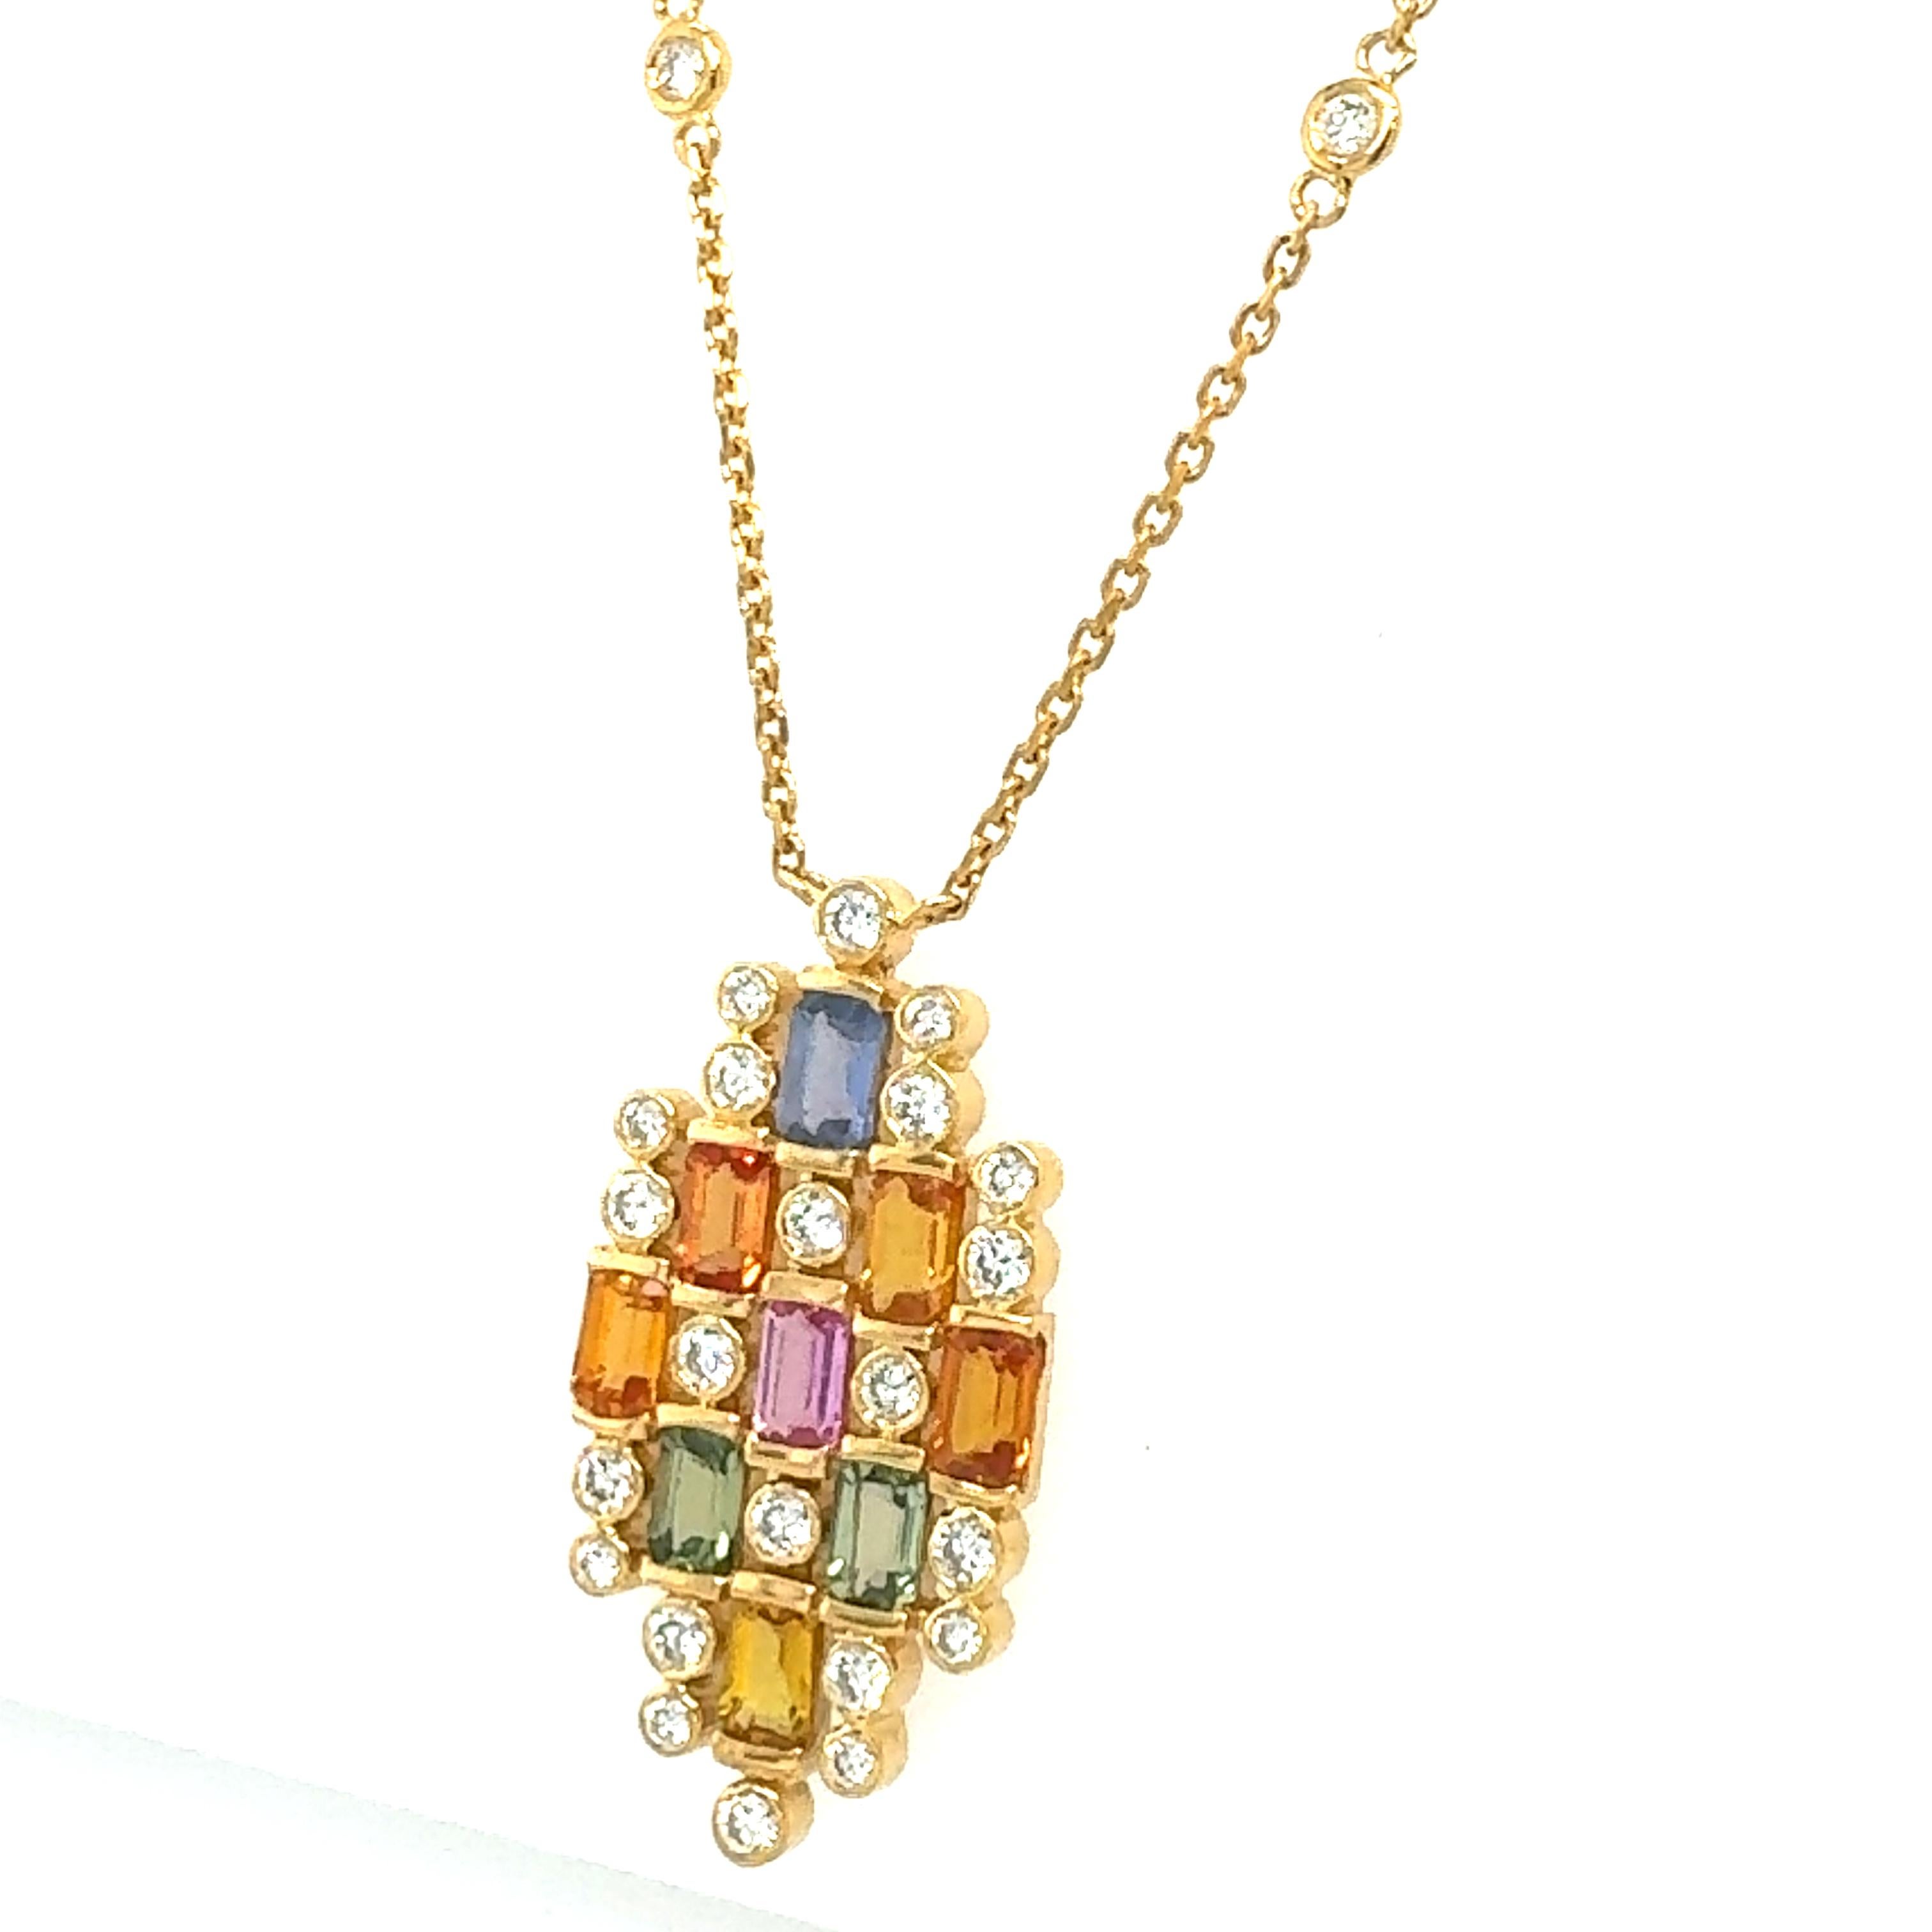 An gorgeous necklace made of 18-karat yellow gold, set with a natural 0.70-carat diamond and a 3.28-carat natural multi sapphire. The necklace's chain is made of diamond yard, and it is adorned with diamonds, and you are able to change the